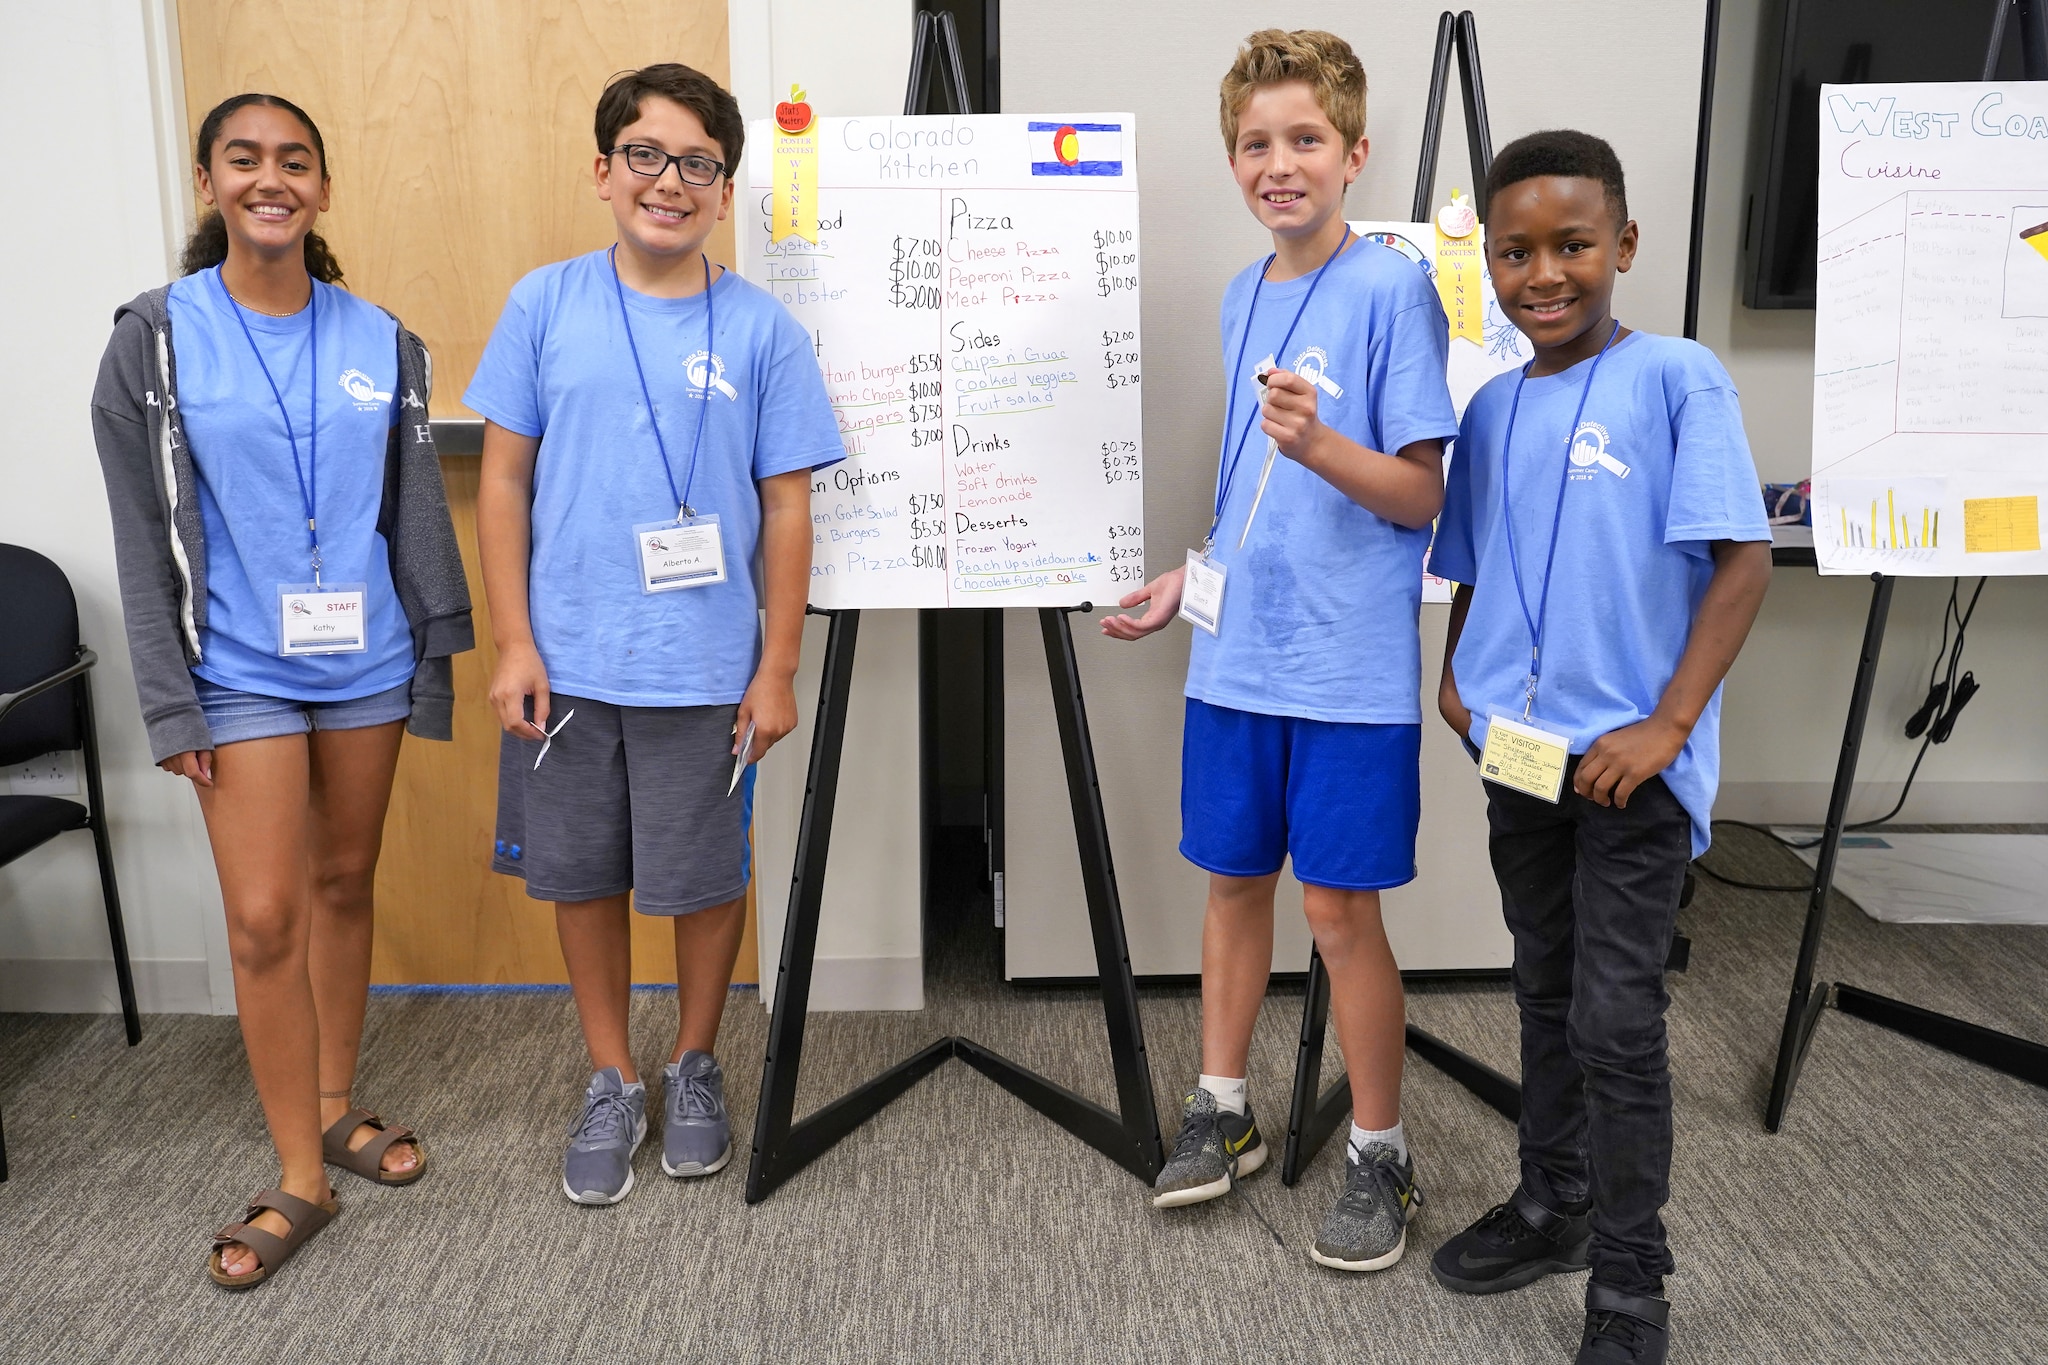 Photos of Campers and Teachers from the 2018 Data Detective Camp